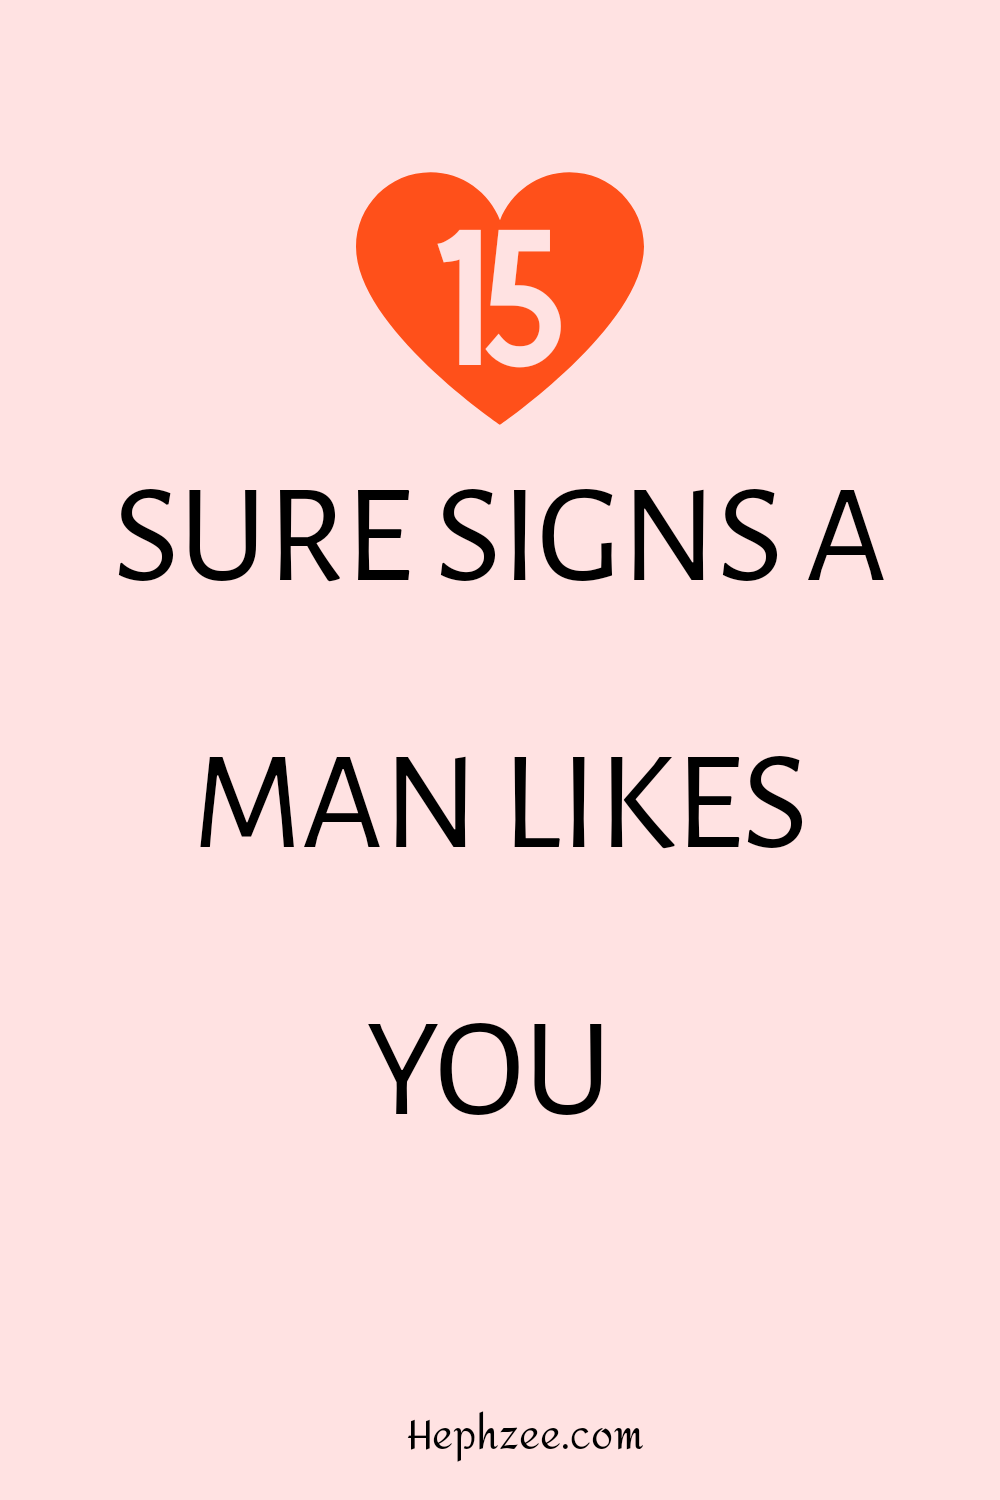 Sure signs a man likes you